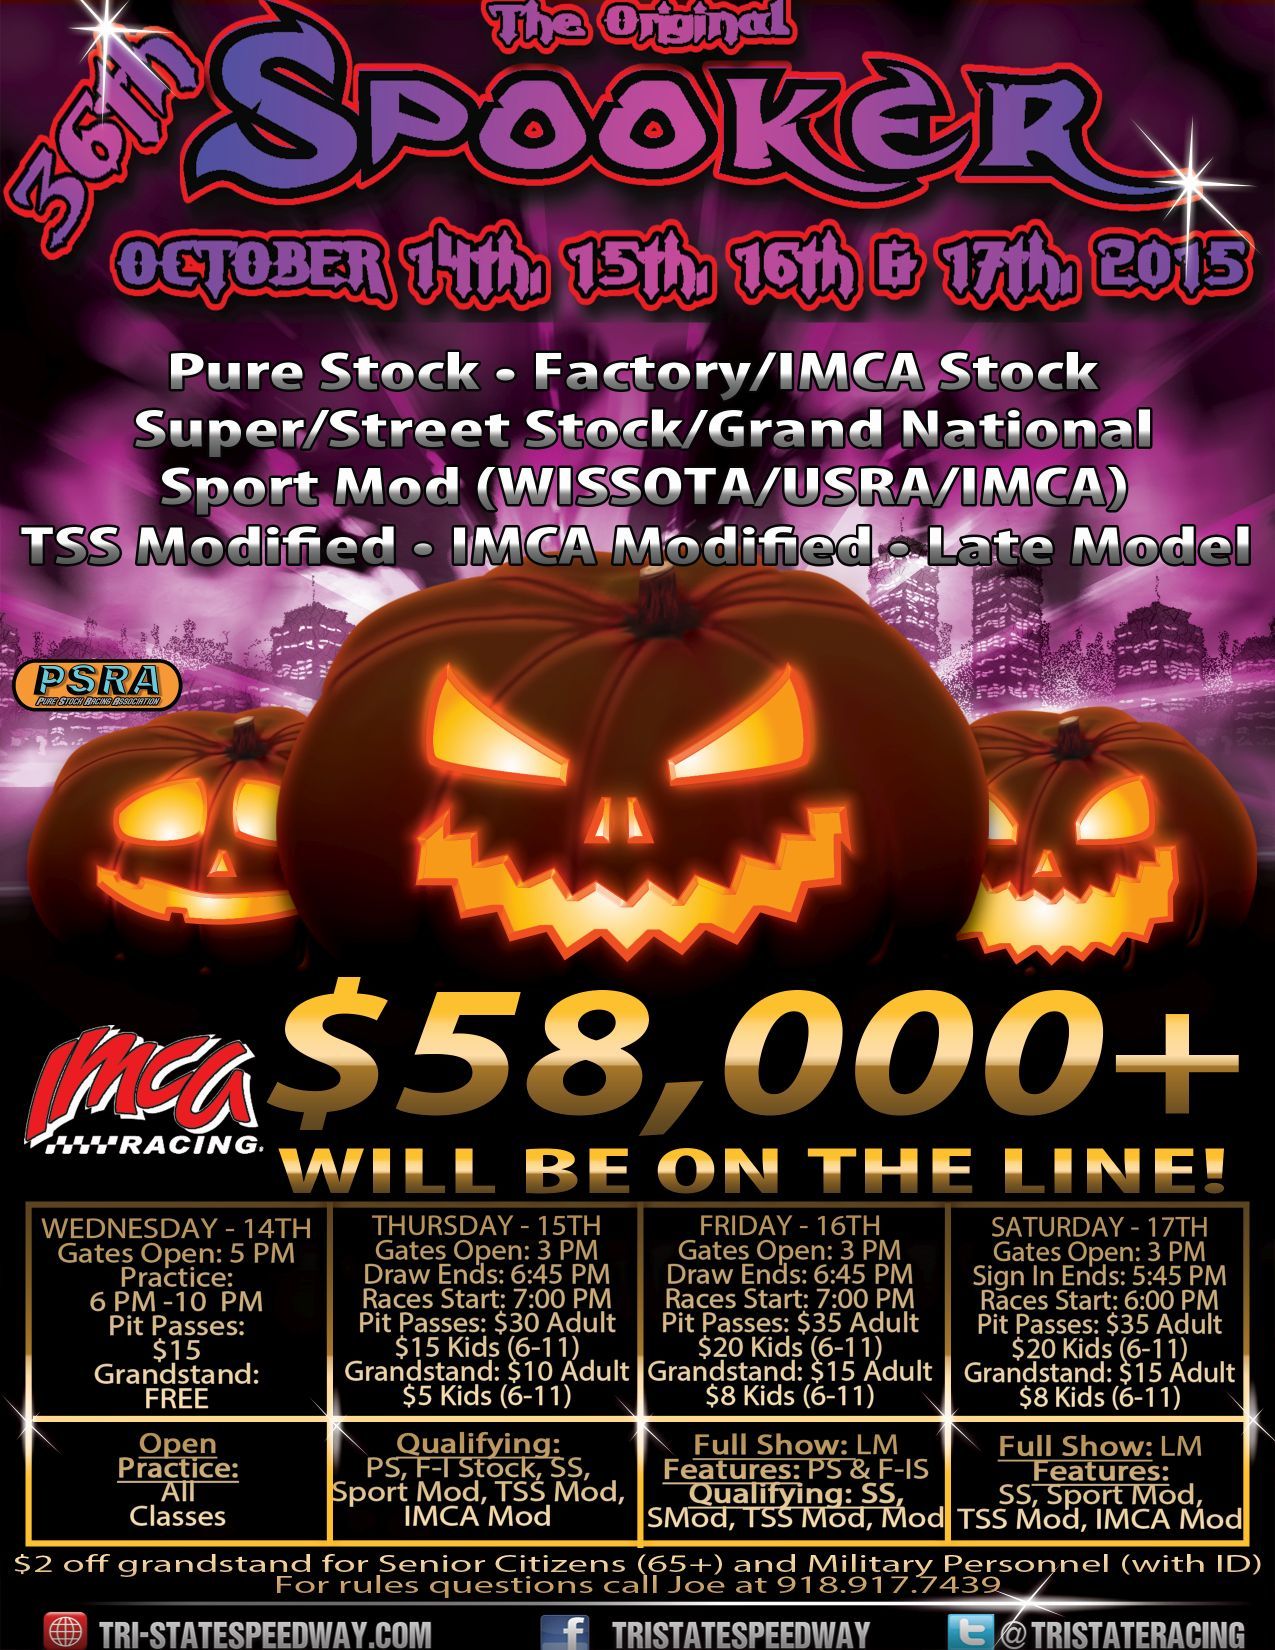 Night 2 Results - 36th Annual Spooker